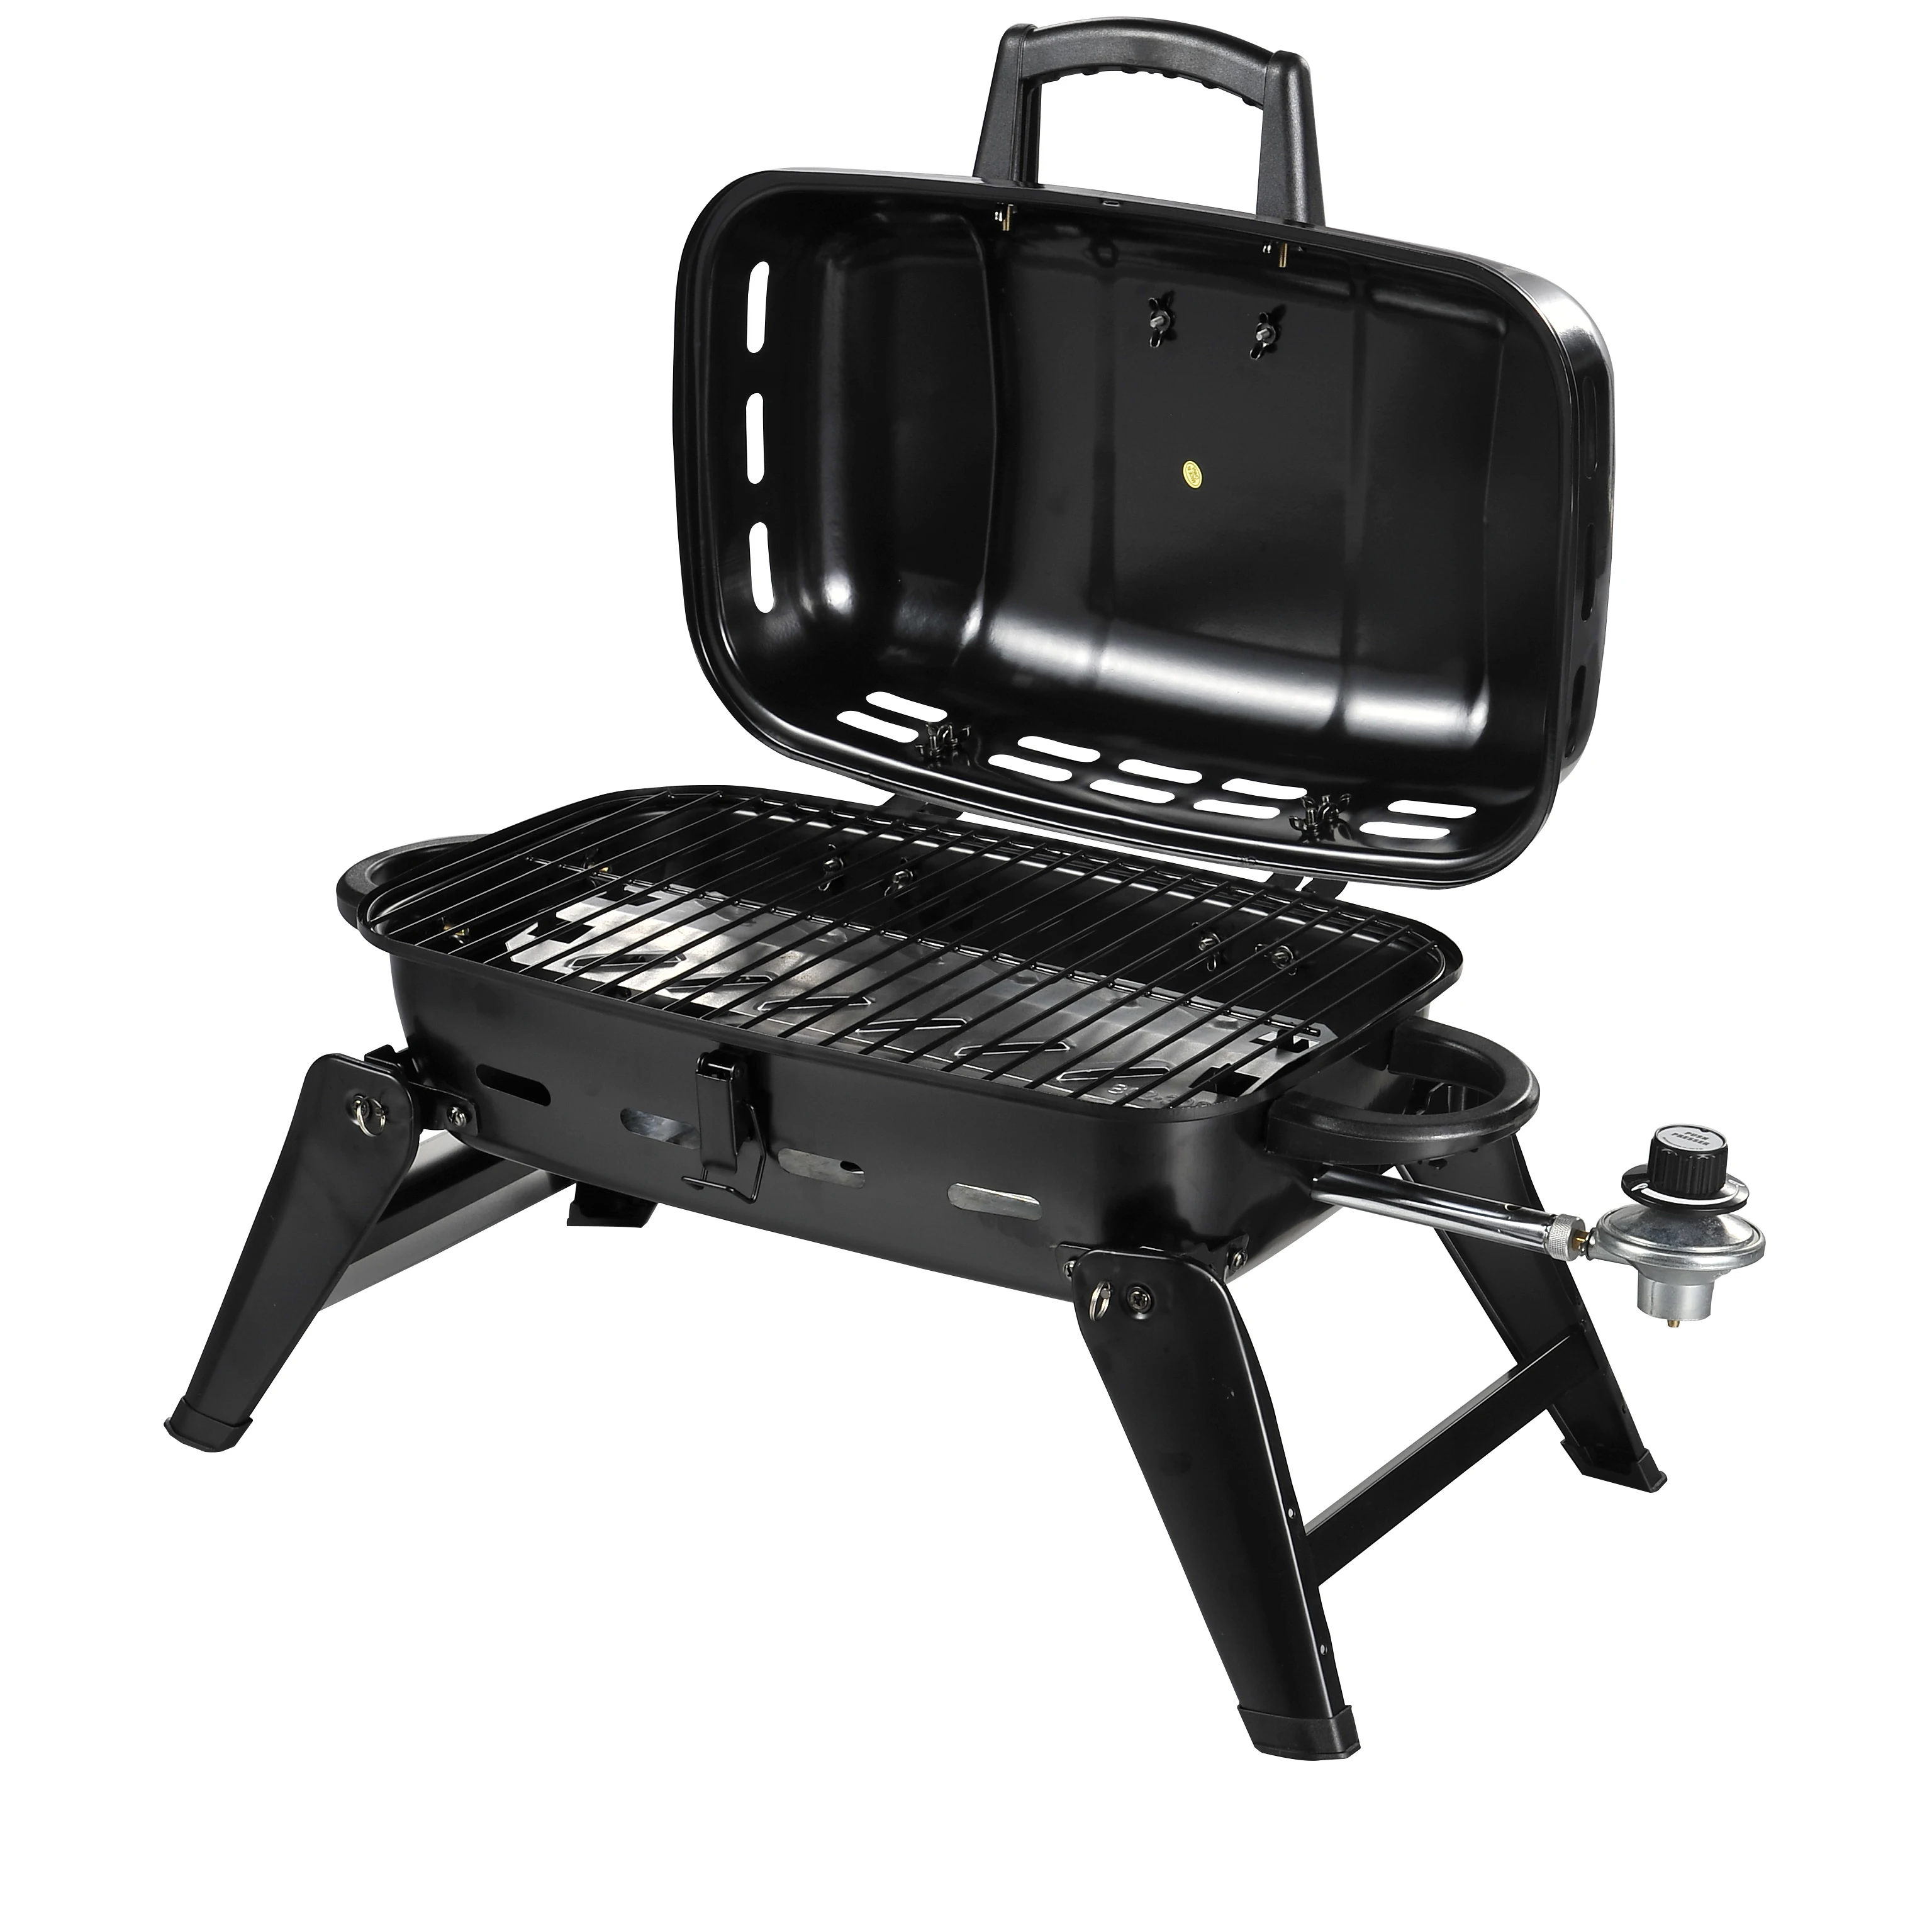 Portable Gas Grill For Camping - HTB1Ps4BKASWBuNjSszDq6zeSpXaa